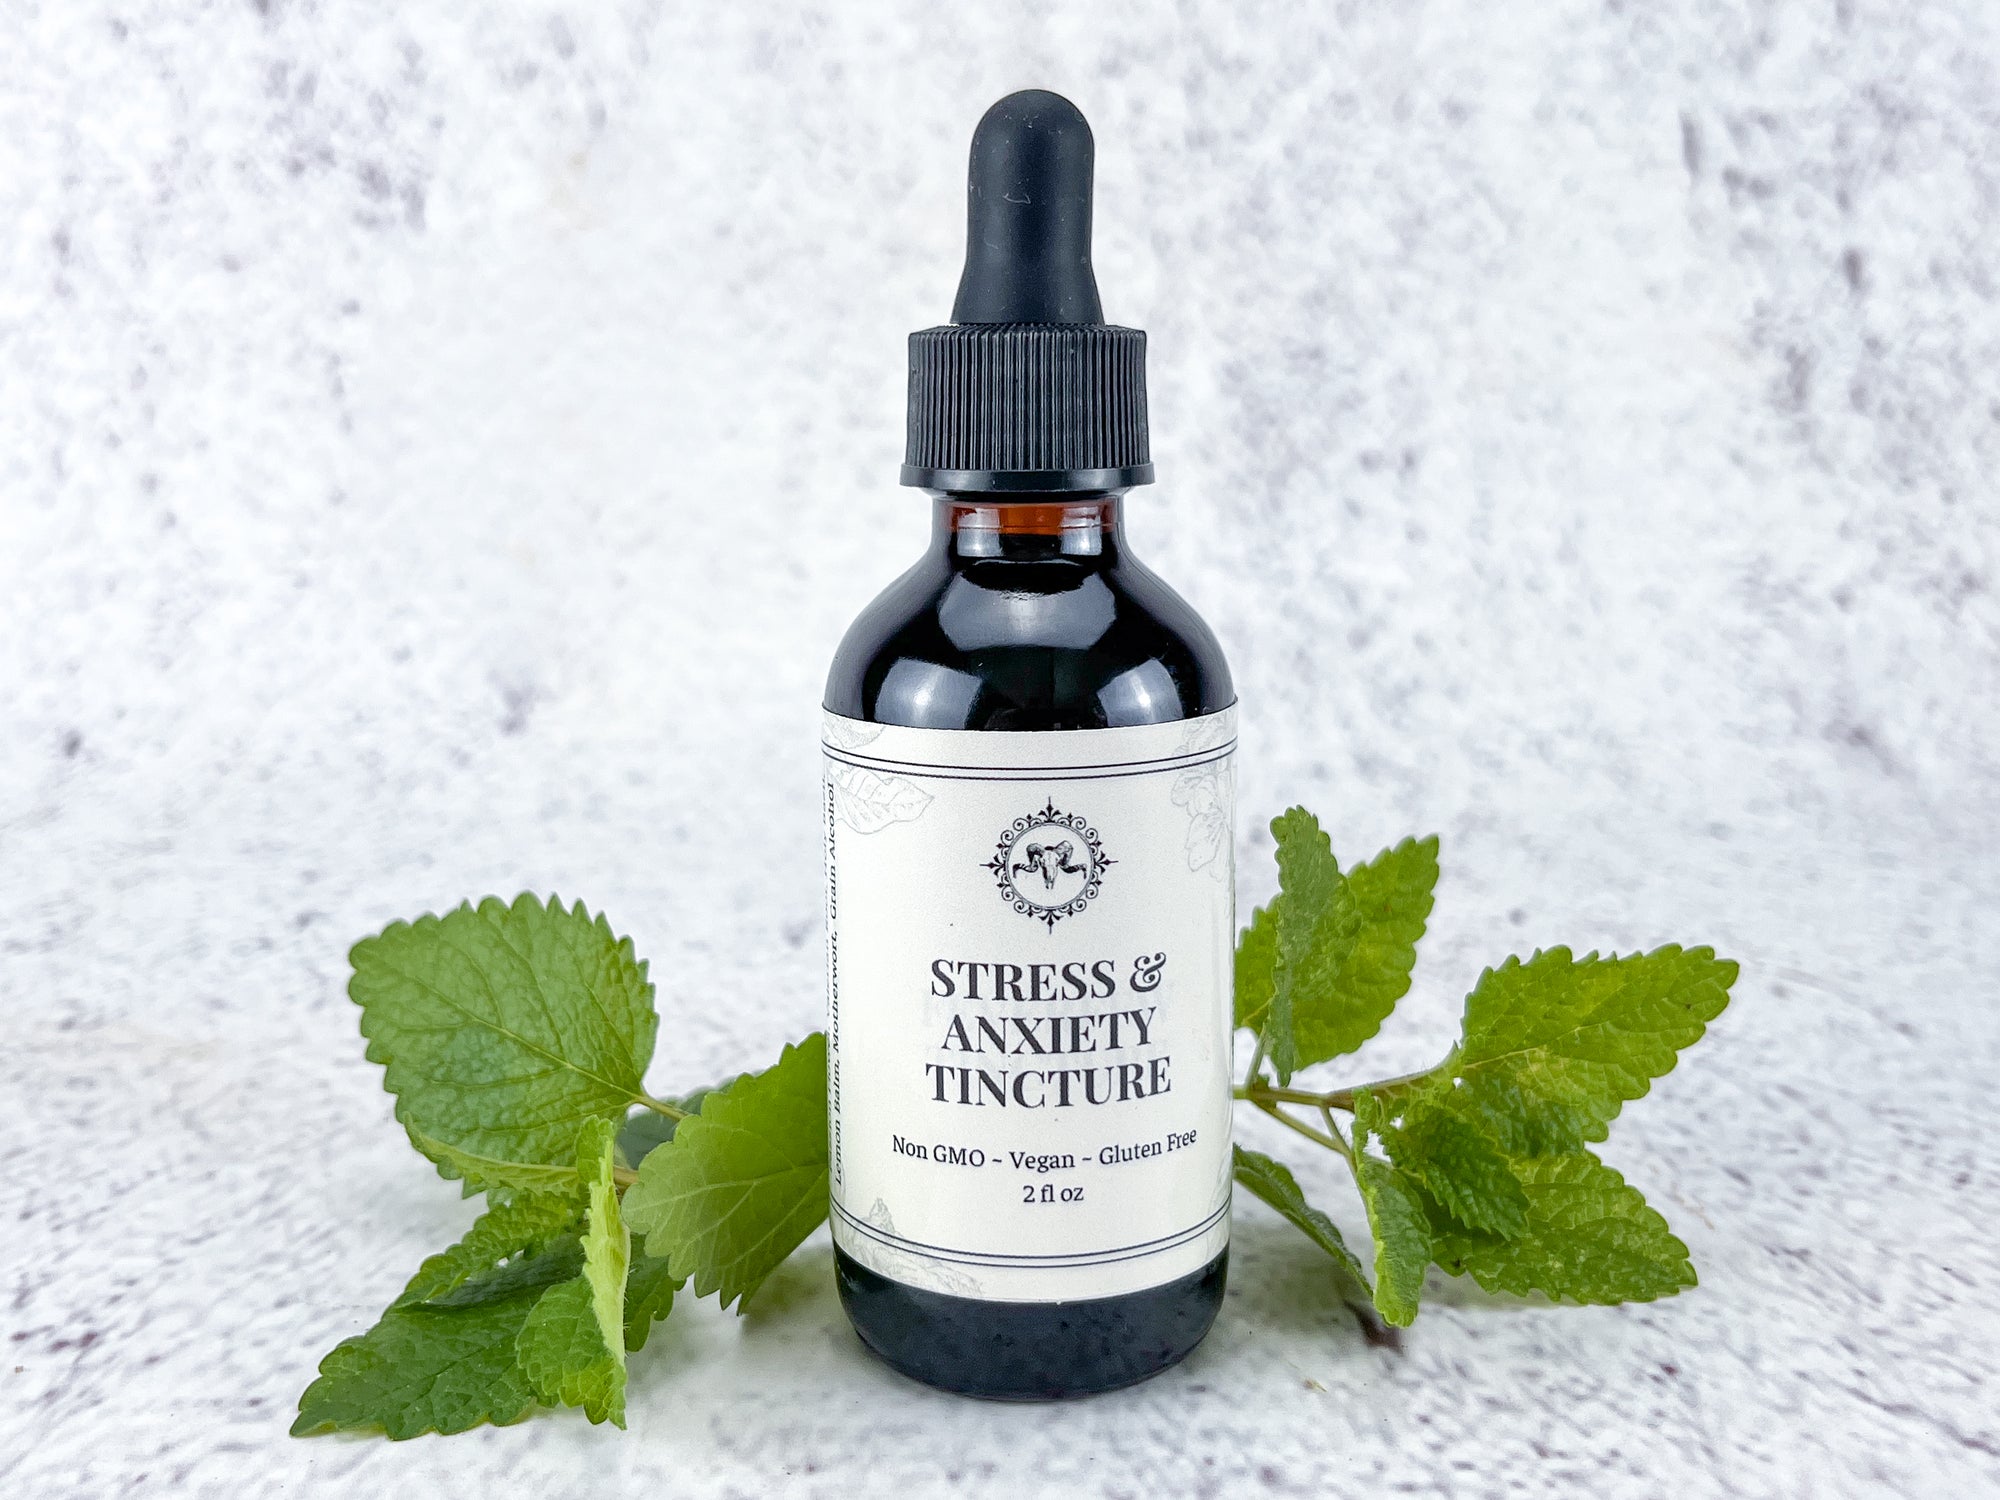 Stress and Anxiety Tincture